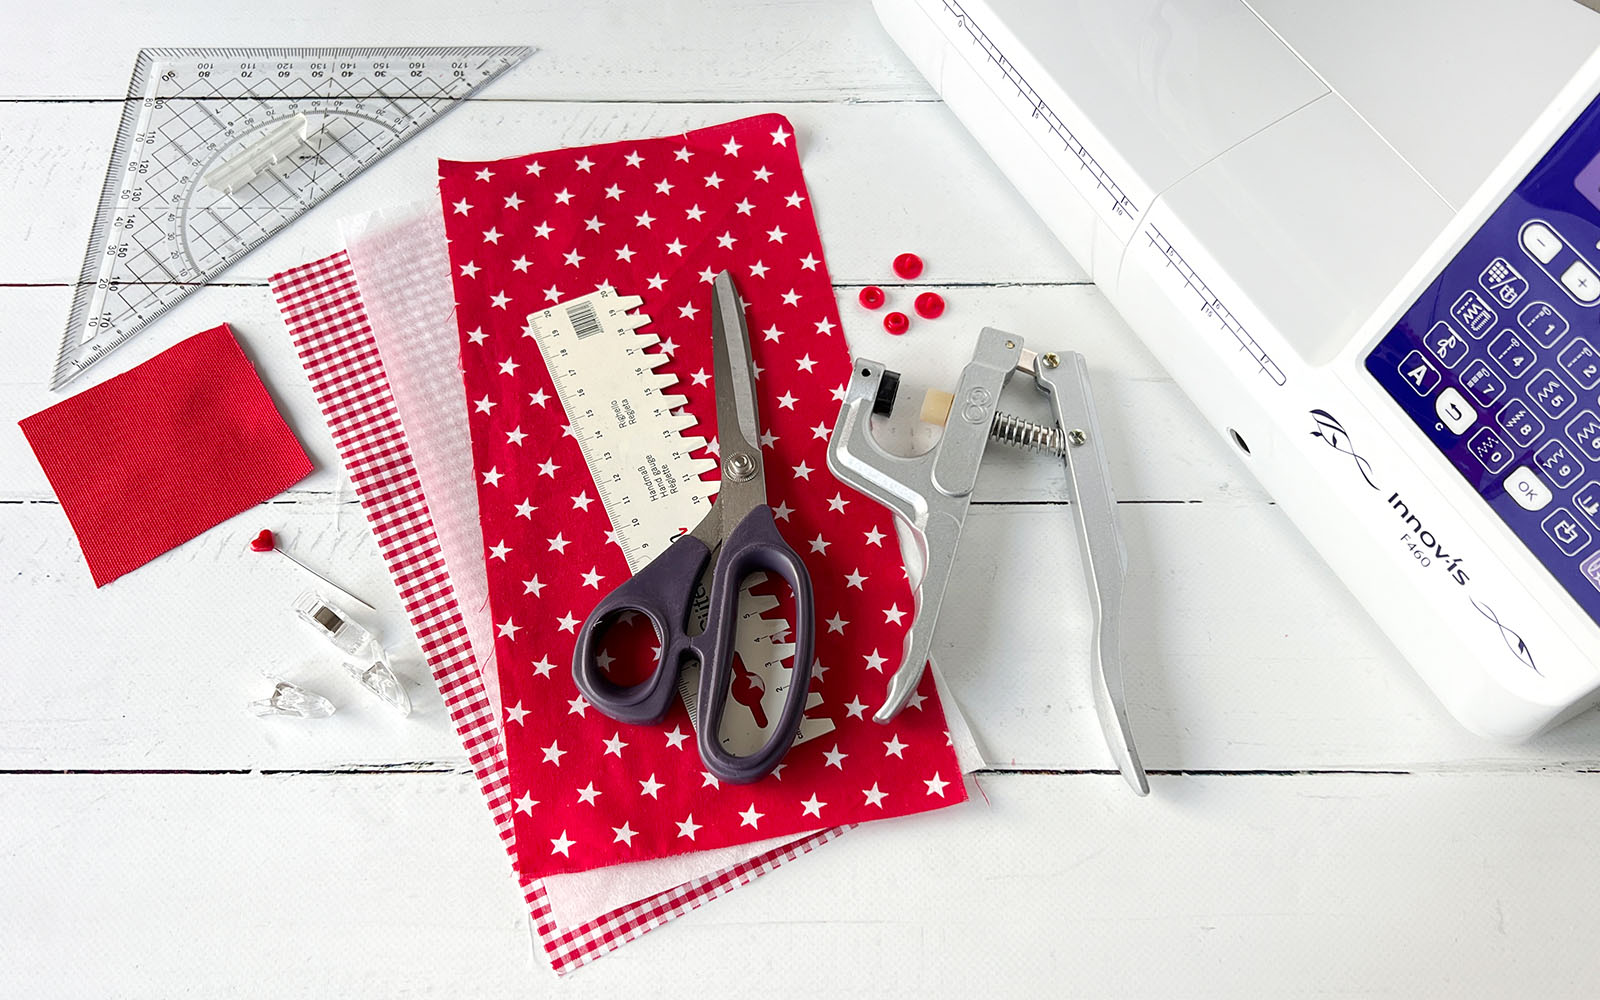 Brother sewing machine and sewing equipment on white background